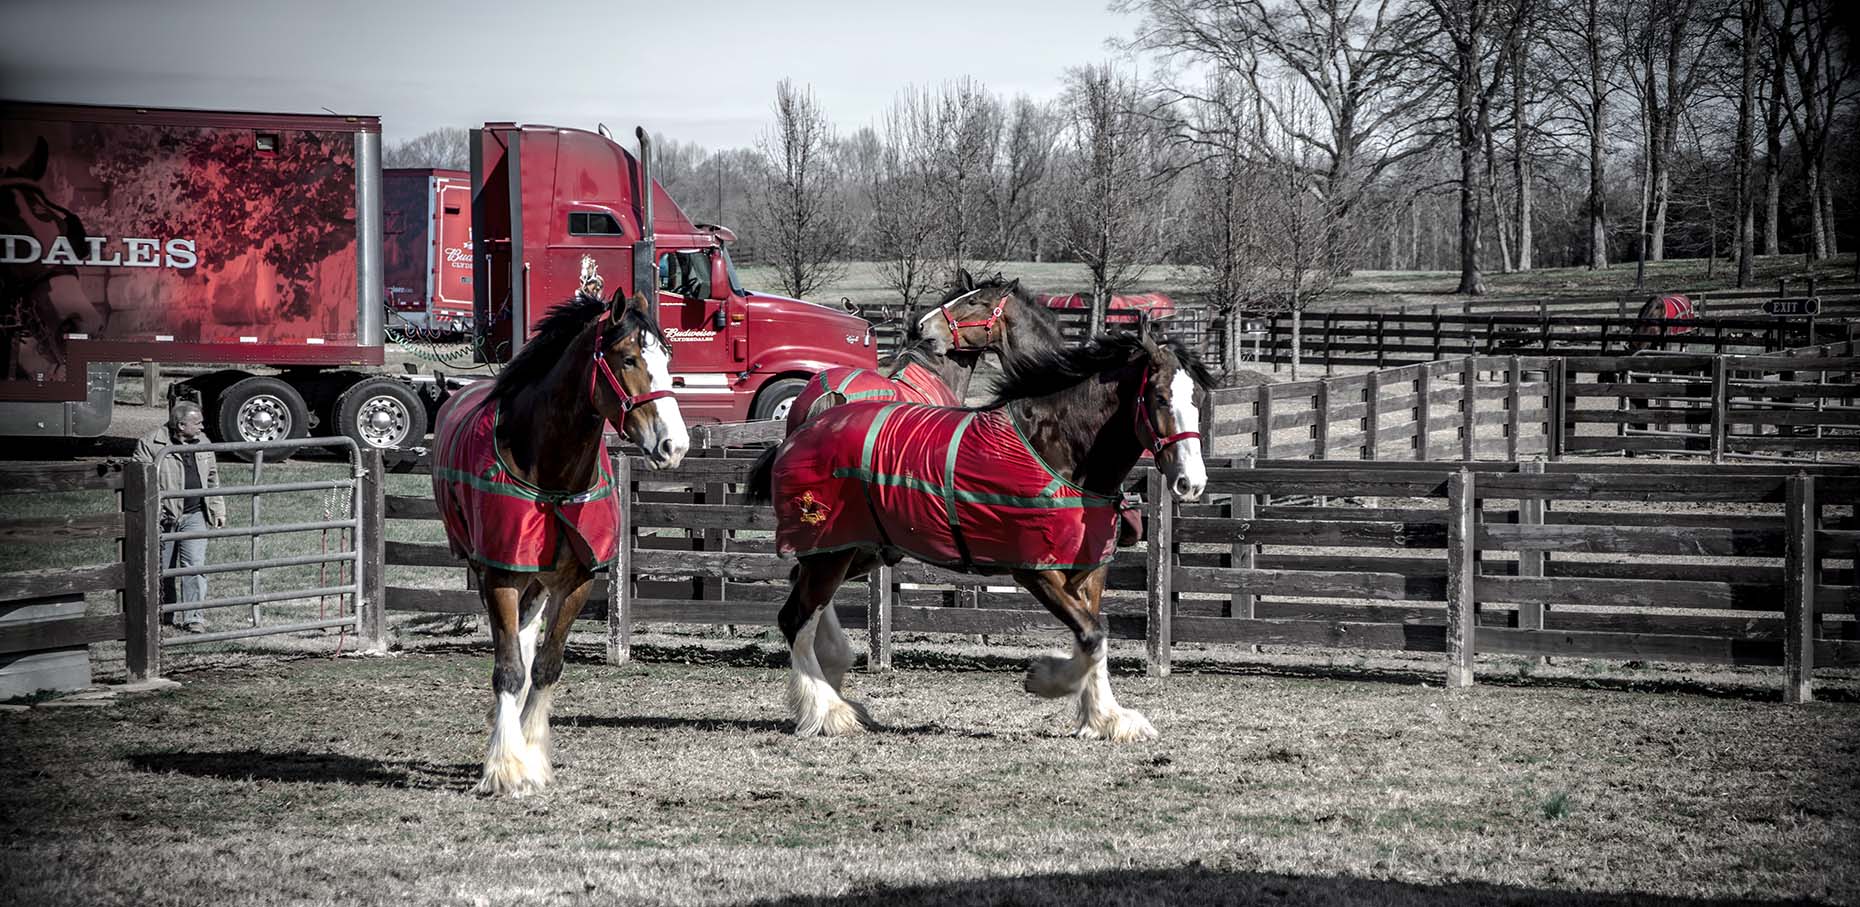 The Clydesdale Horses